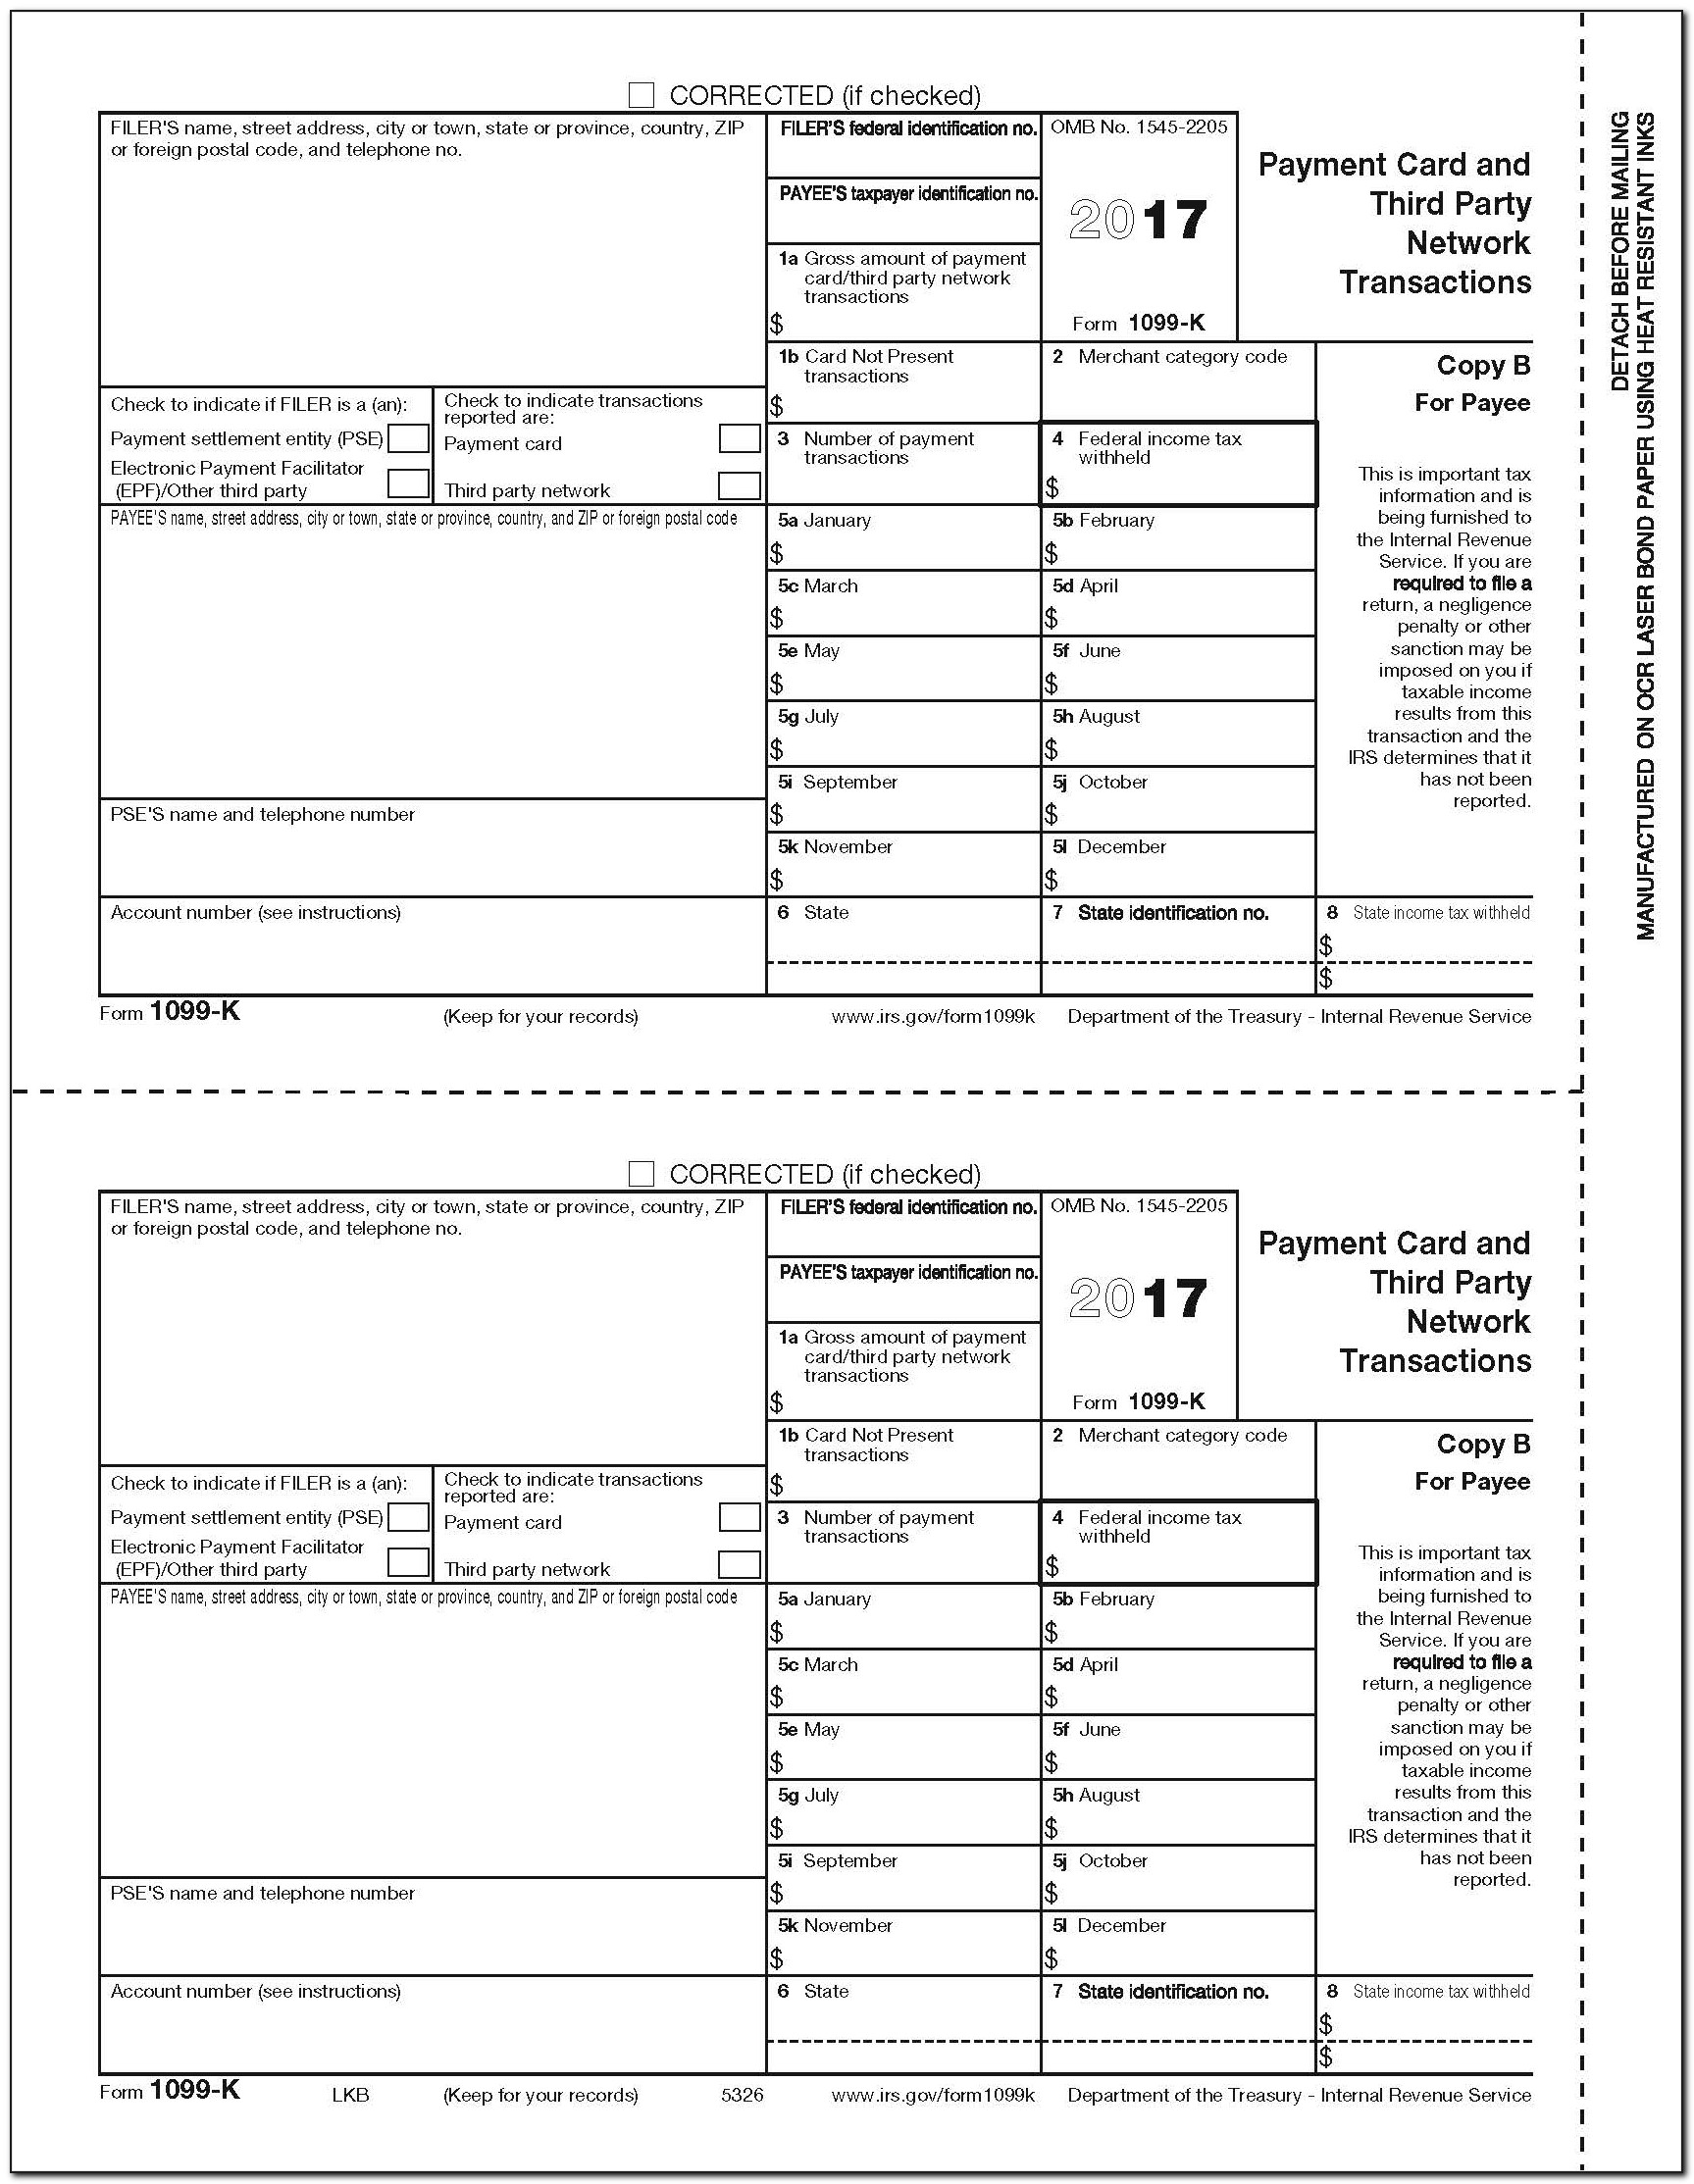 Where To Mail Form 1099 Misc